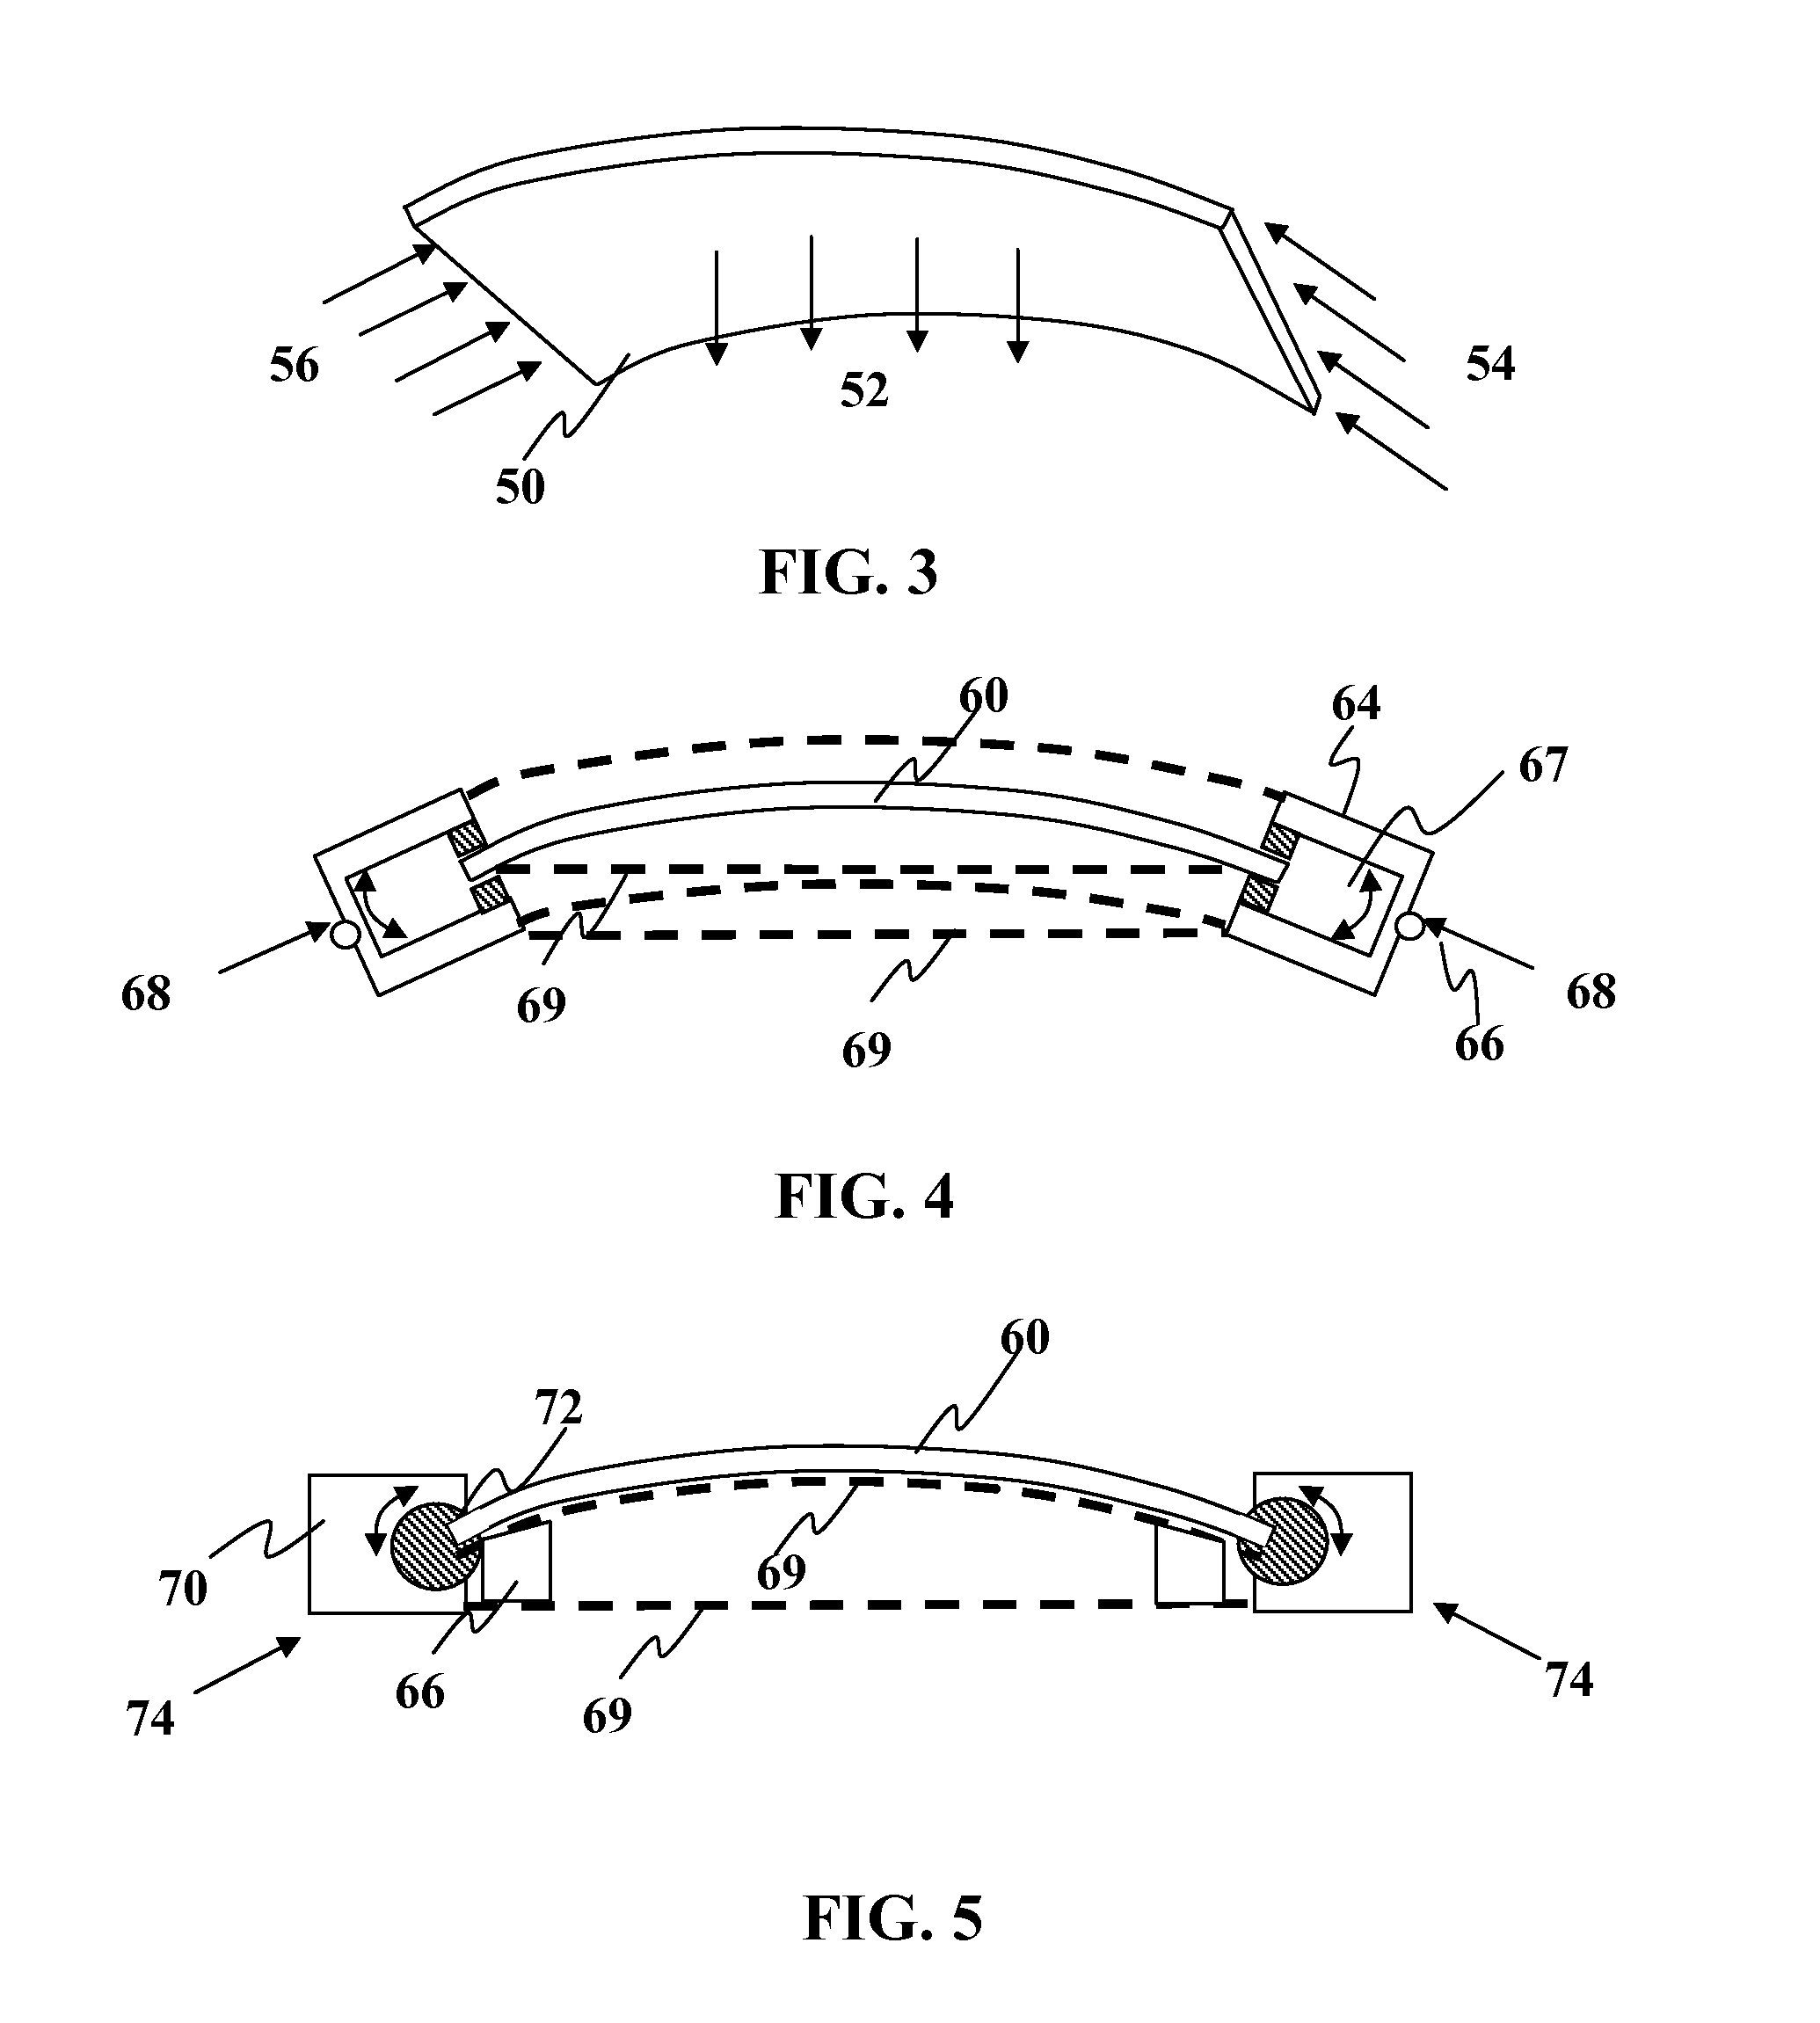 Compression or arched mounting of solar panels